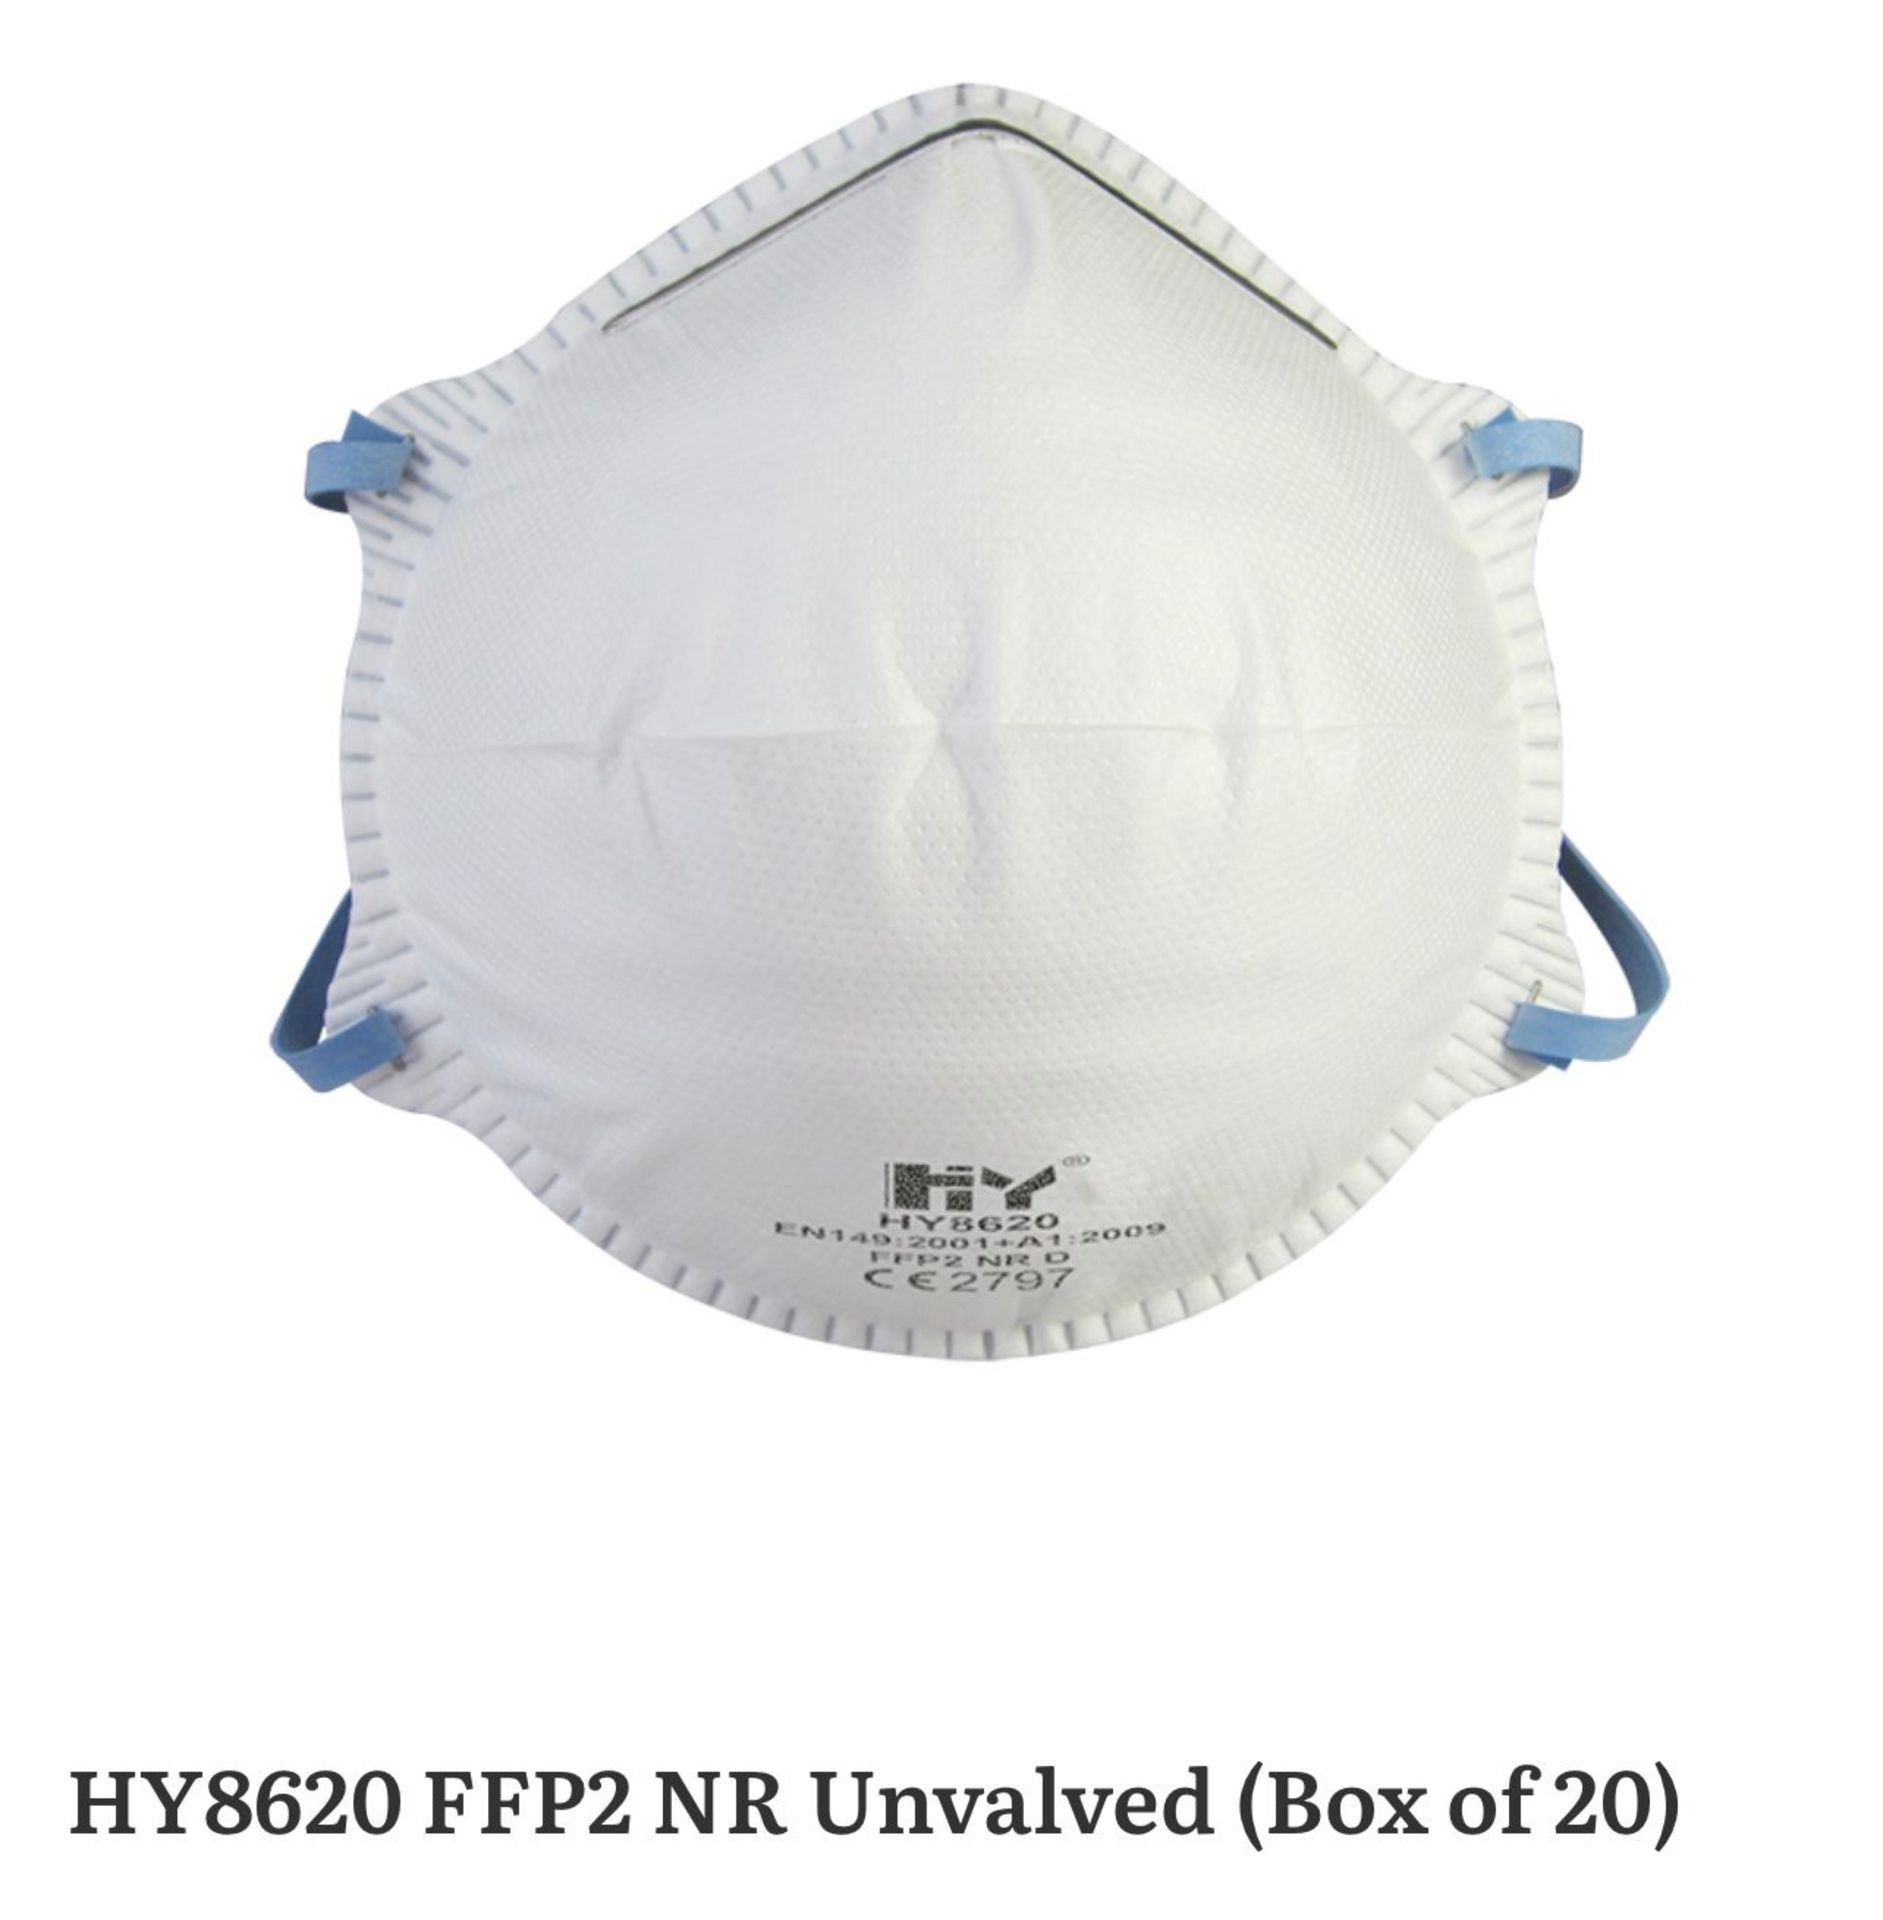 480 BOXES OF HANDANHY HY8620 FFP2 DUST PROTECTION FACE MASKS WORKWEAR 20pack - RRP £4.99, EXP 05/25 - Image 5 of 5